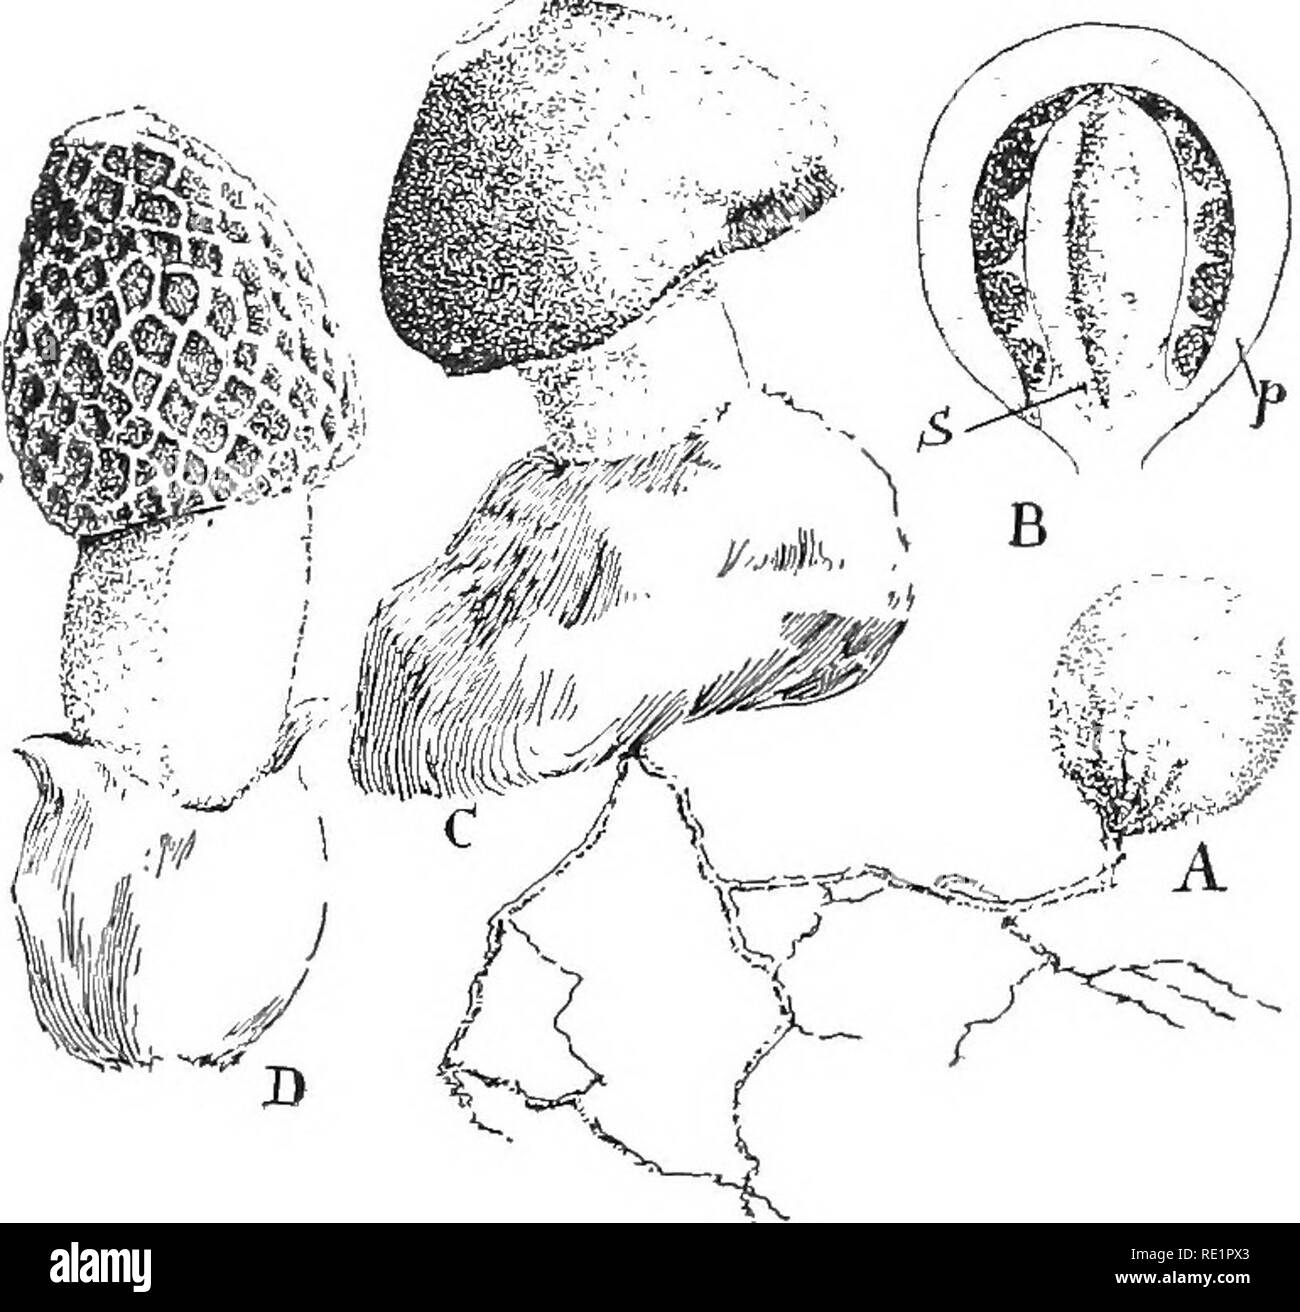 . Nature and development of plants. Botany. 268 DEVELOPMENT OF PHALLALES They differ chiefly from the puffballs in that the spore-bearing cavities are surrounded by tougher hyphae. Consequently, when the periderm of these Httle cup-shaped bodies opens, these tougher parts appear as minute eggs in a nest (Fig. 177, B). 100. Order f. Phallales or Stink Horns.âThese fungi first appear as egg-Hke structures on rather coarse strands of the mycelium which traverse decaying vegetation. These bodies consist of a white skin-Hke periderm which encloses a stipe and. ^ Tig. 178. A common form of the Phal Stock Photo